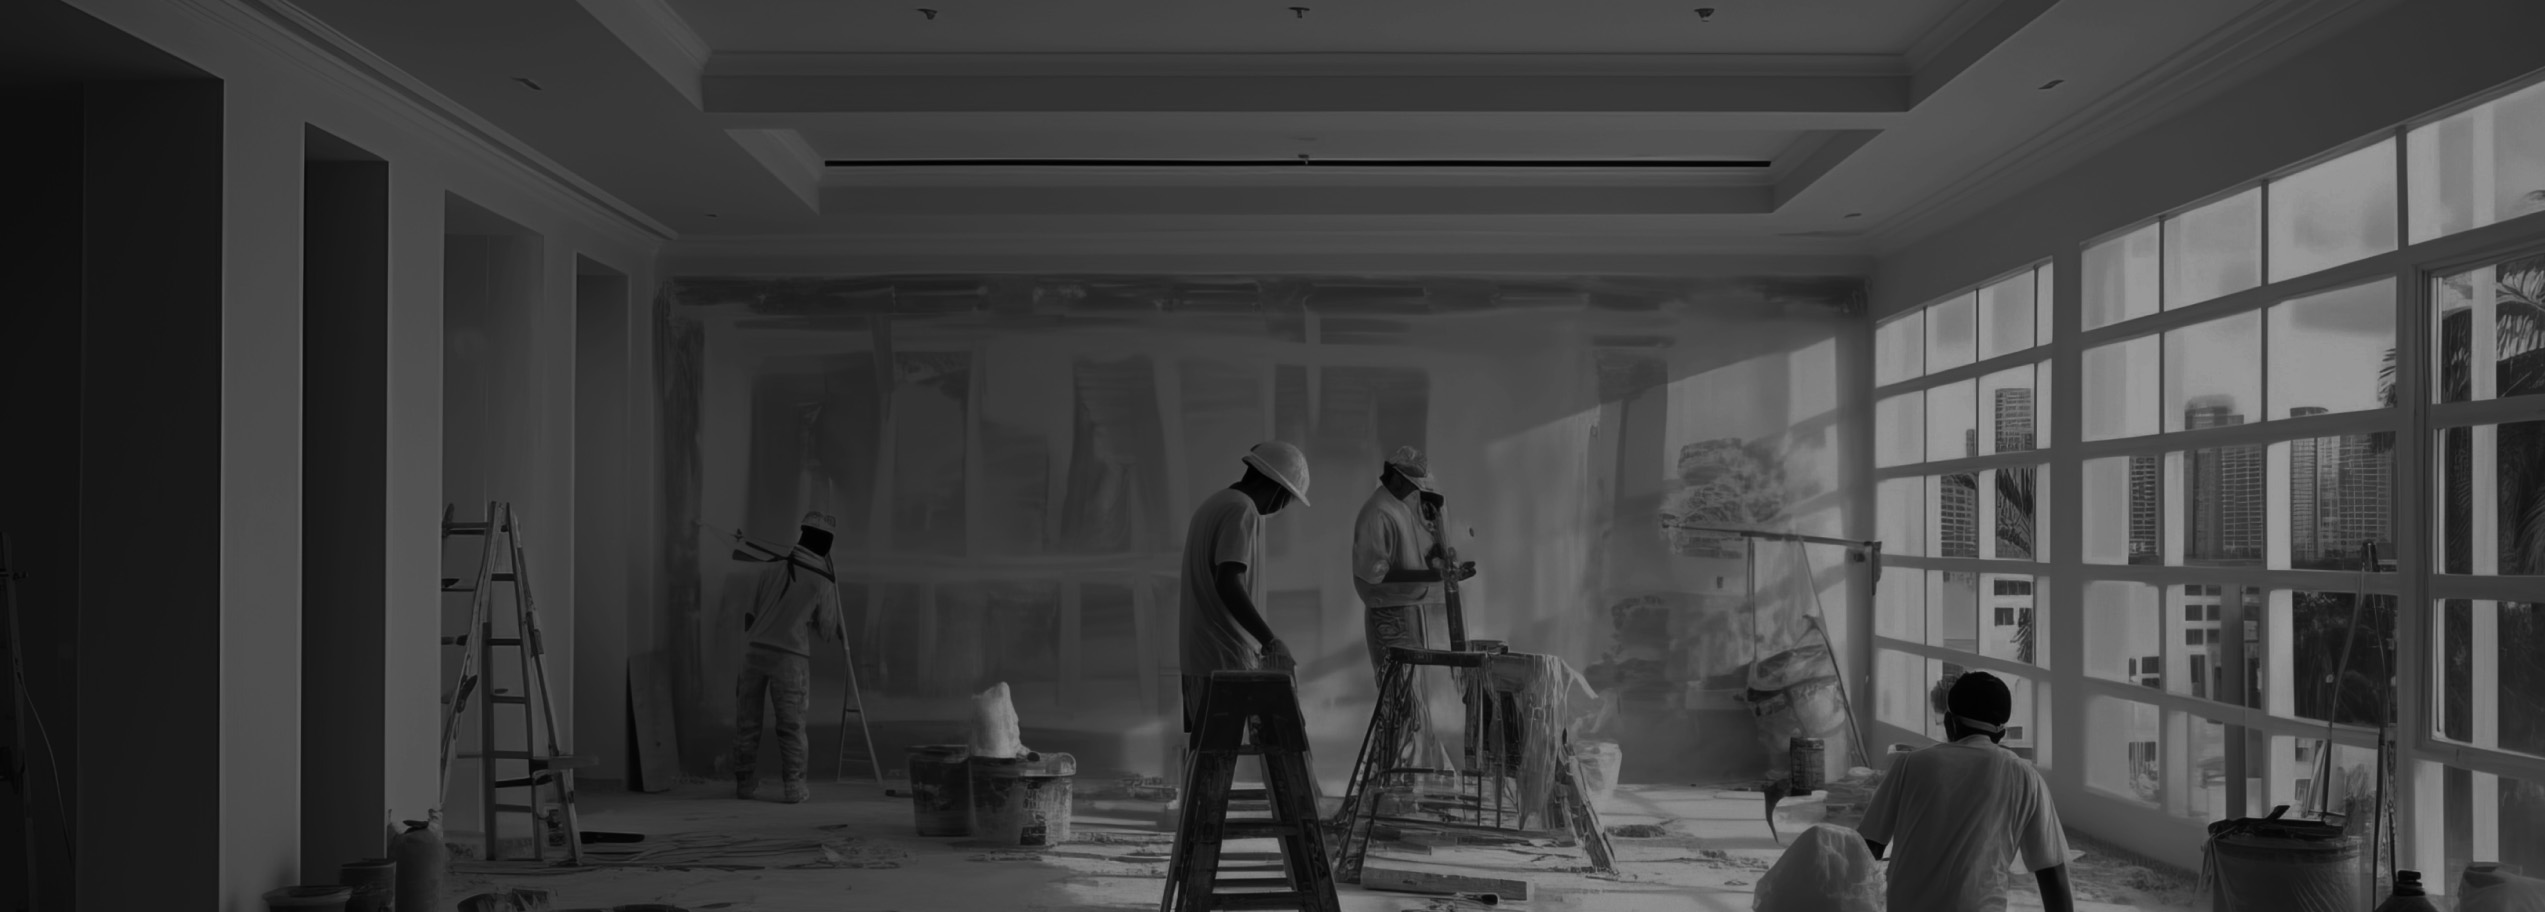 Workers painting interior of a building.